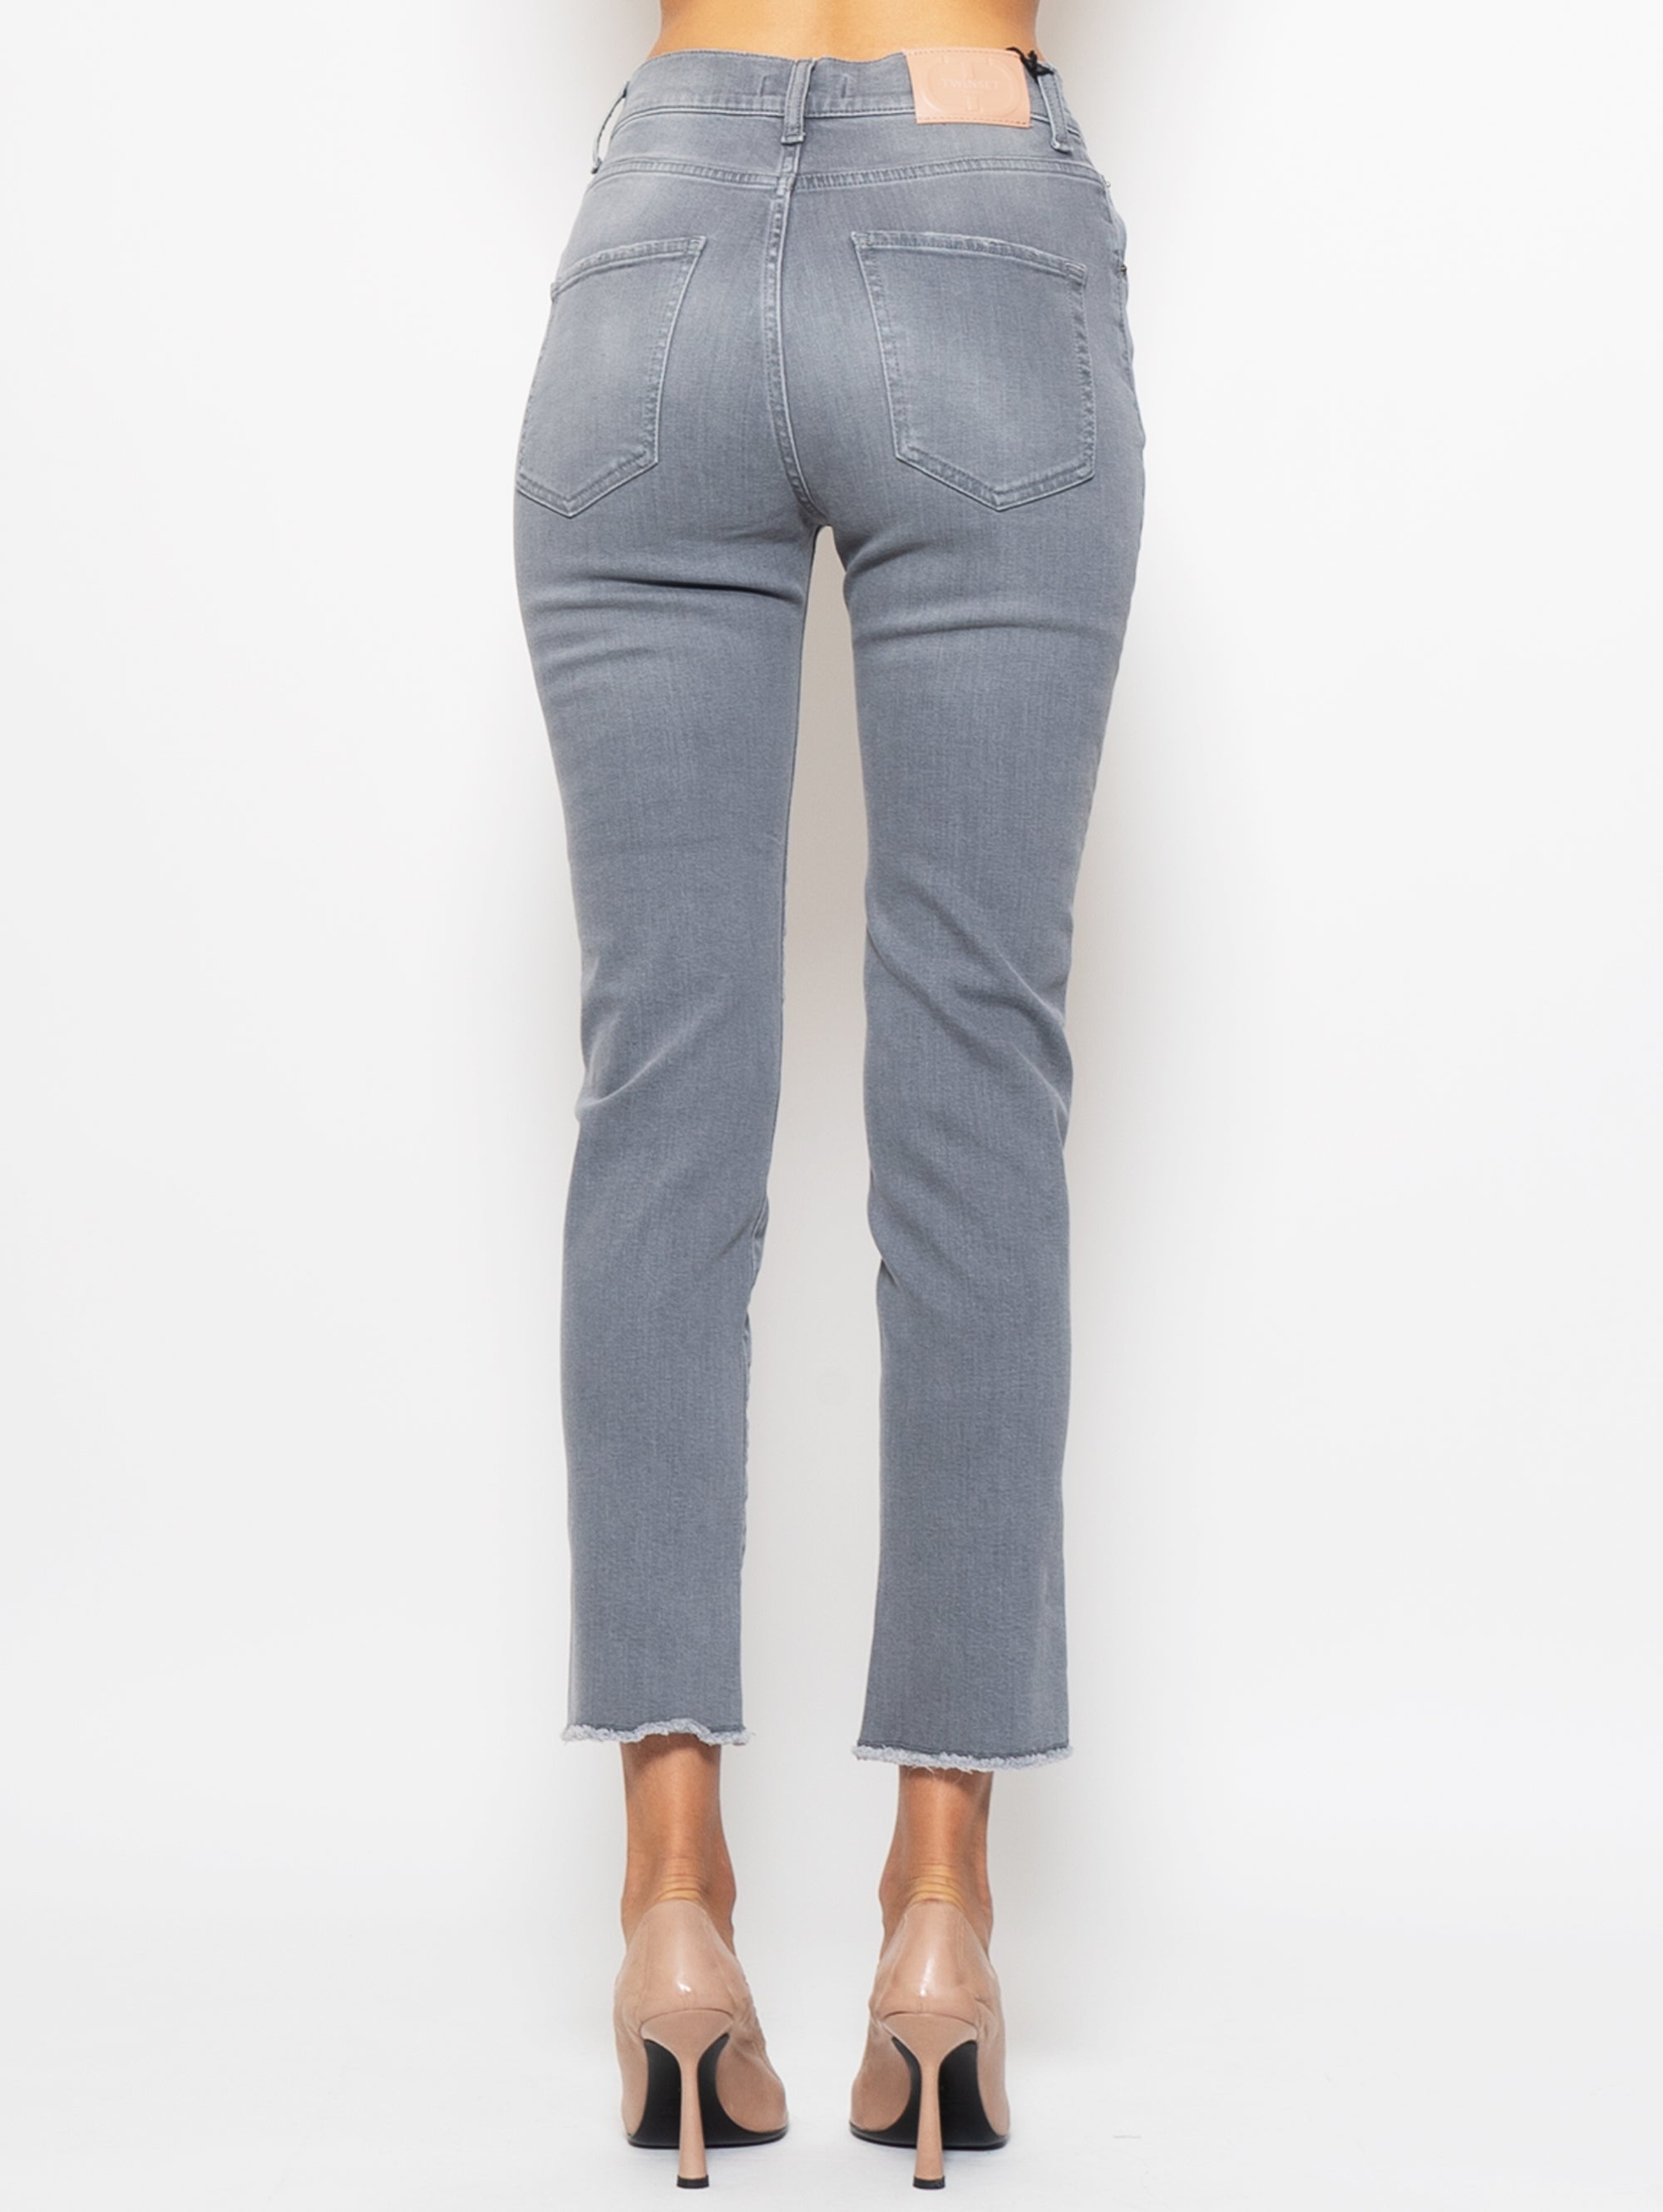 Slim Fit Jeans with Gray Fringed Hem